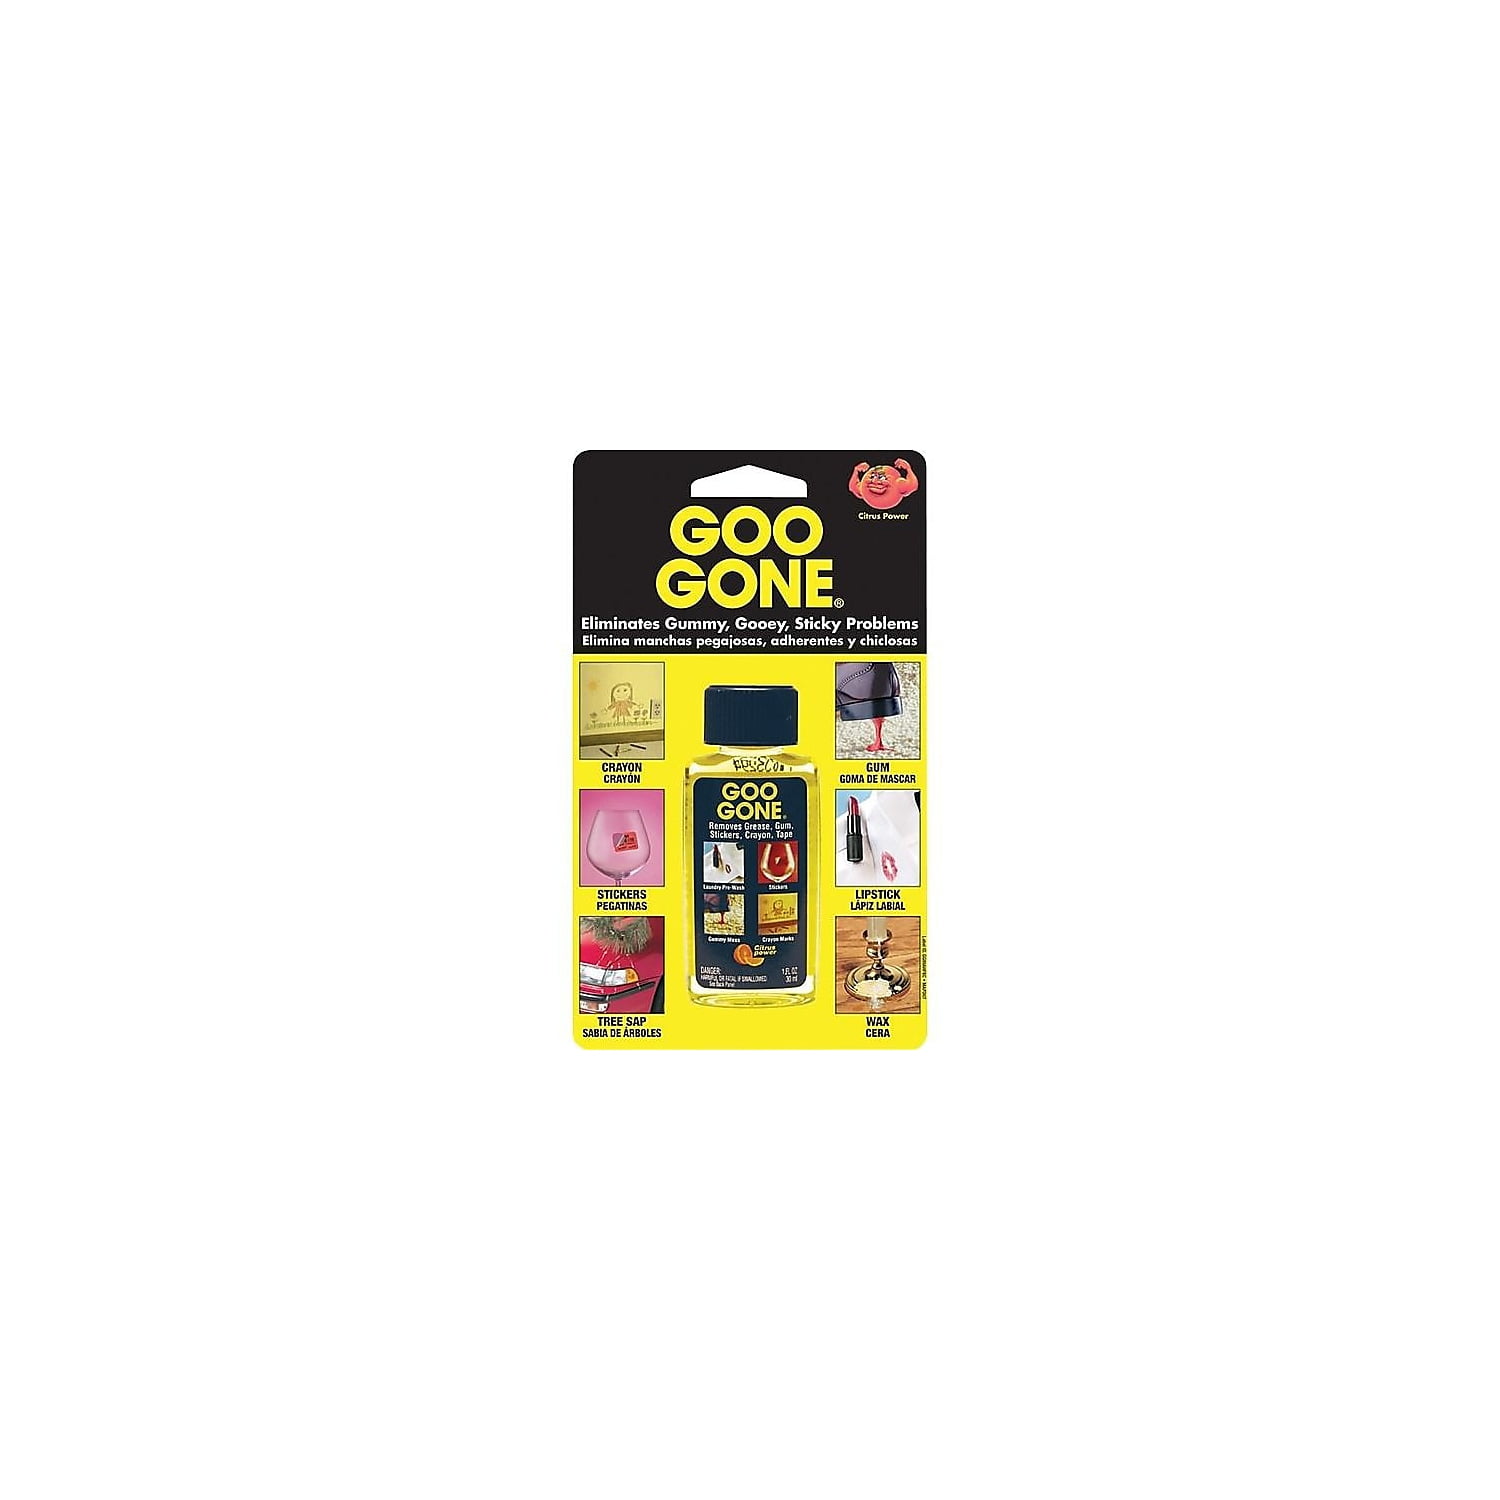 Goo Gone Original Adhesive Remover, Fresh Citrus, 2 Fl. Oz. (2092A) – your  best buys at